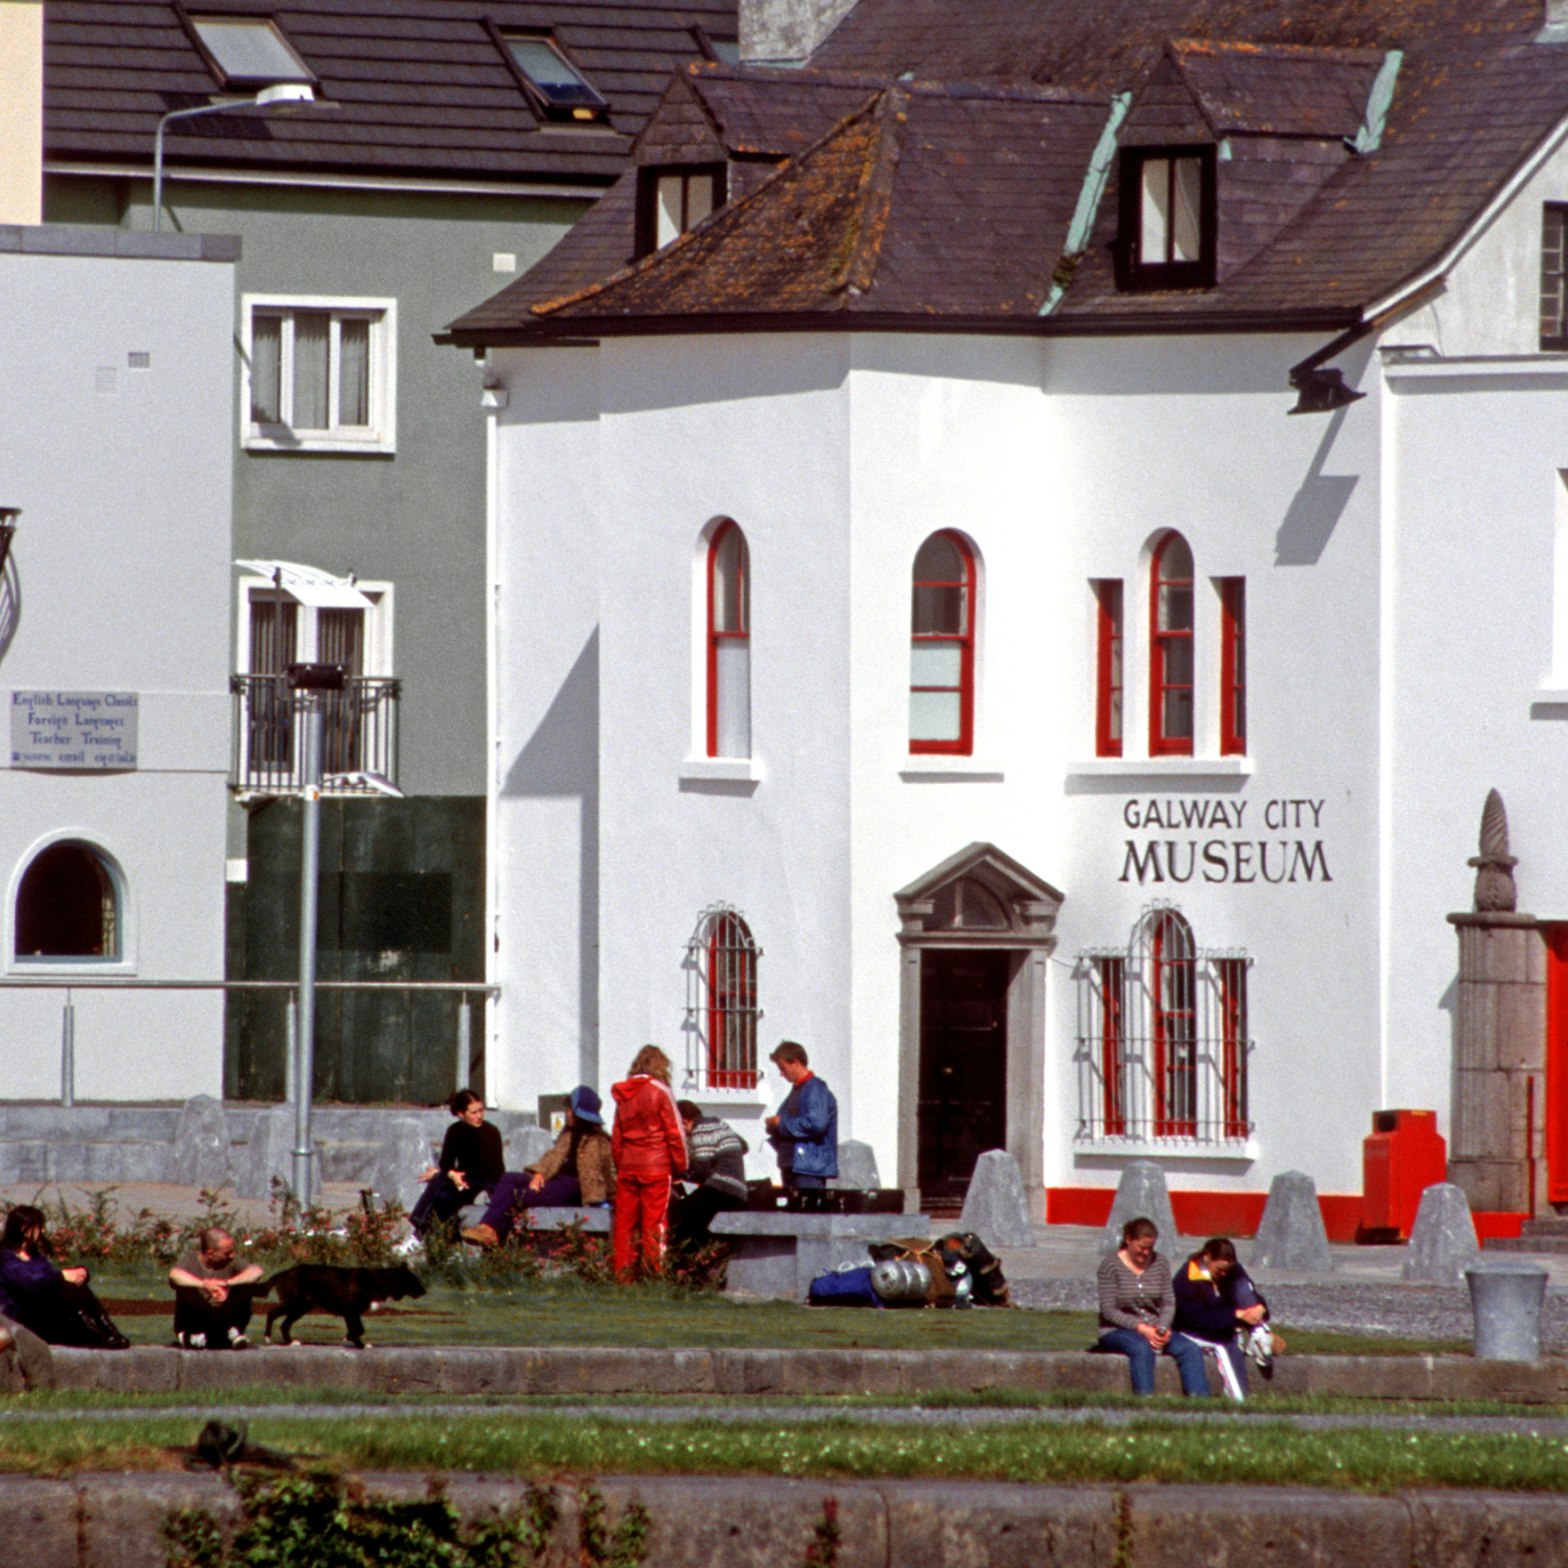 Galway, Ireland - June 17th 2005: Teenagers, some with backpacks, sitting on the bank of river Corrib, front the Galway City Museum.